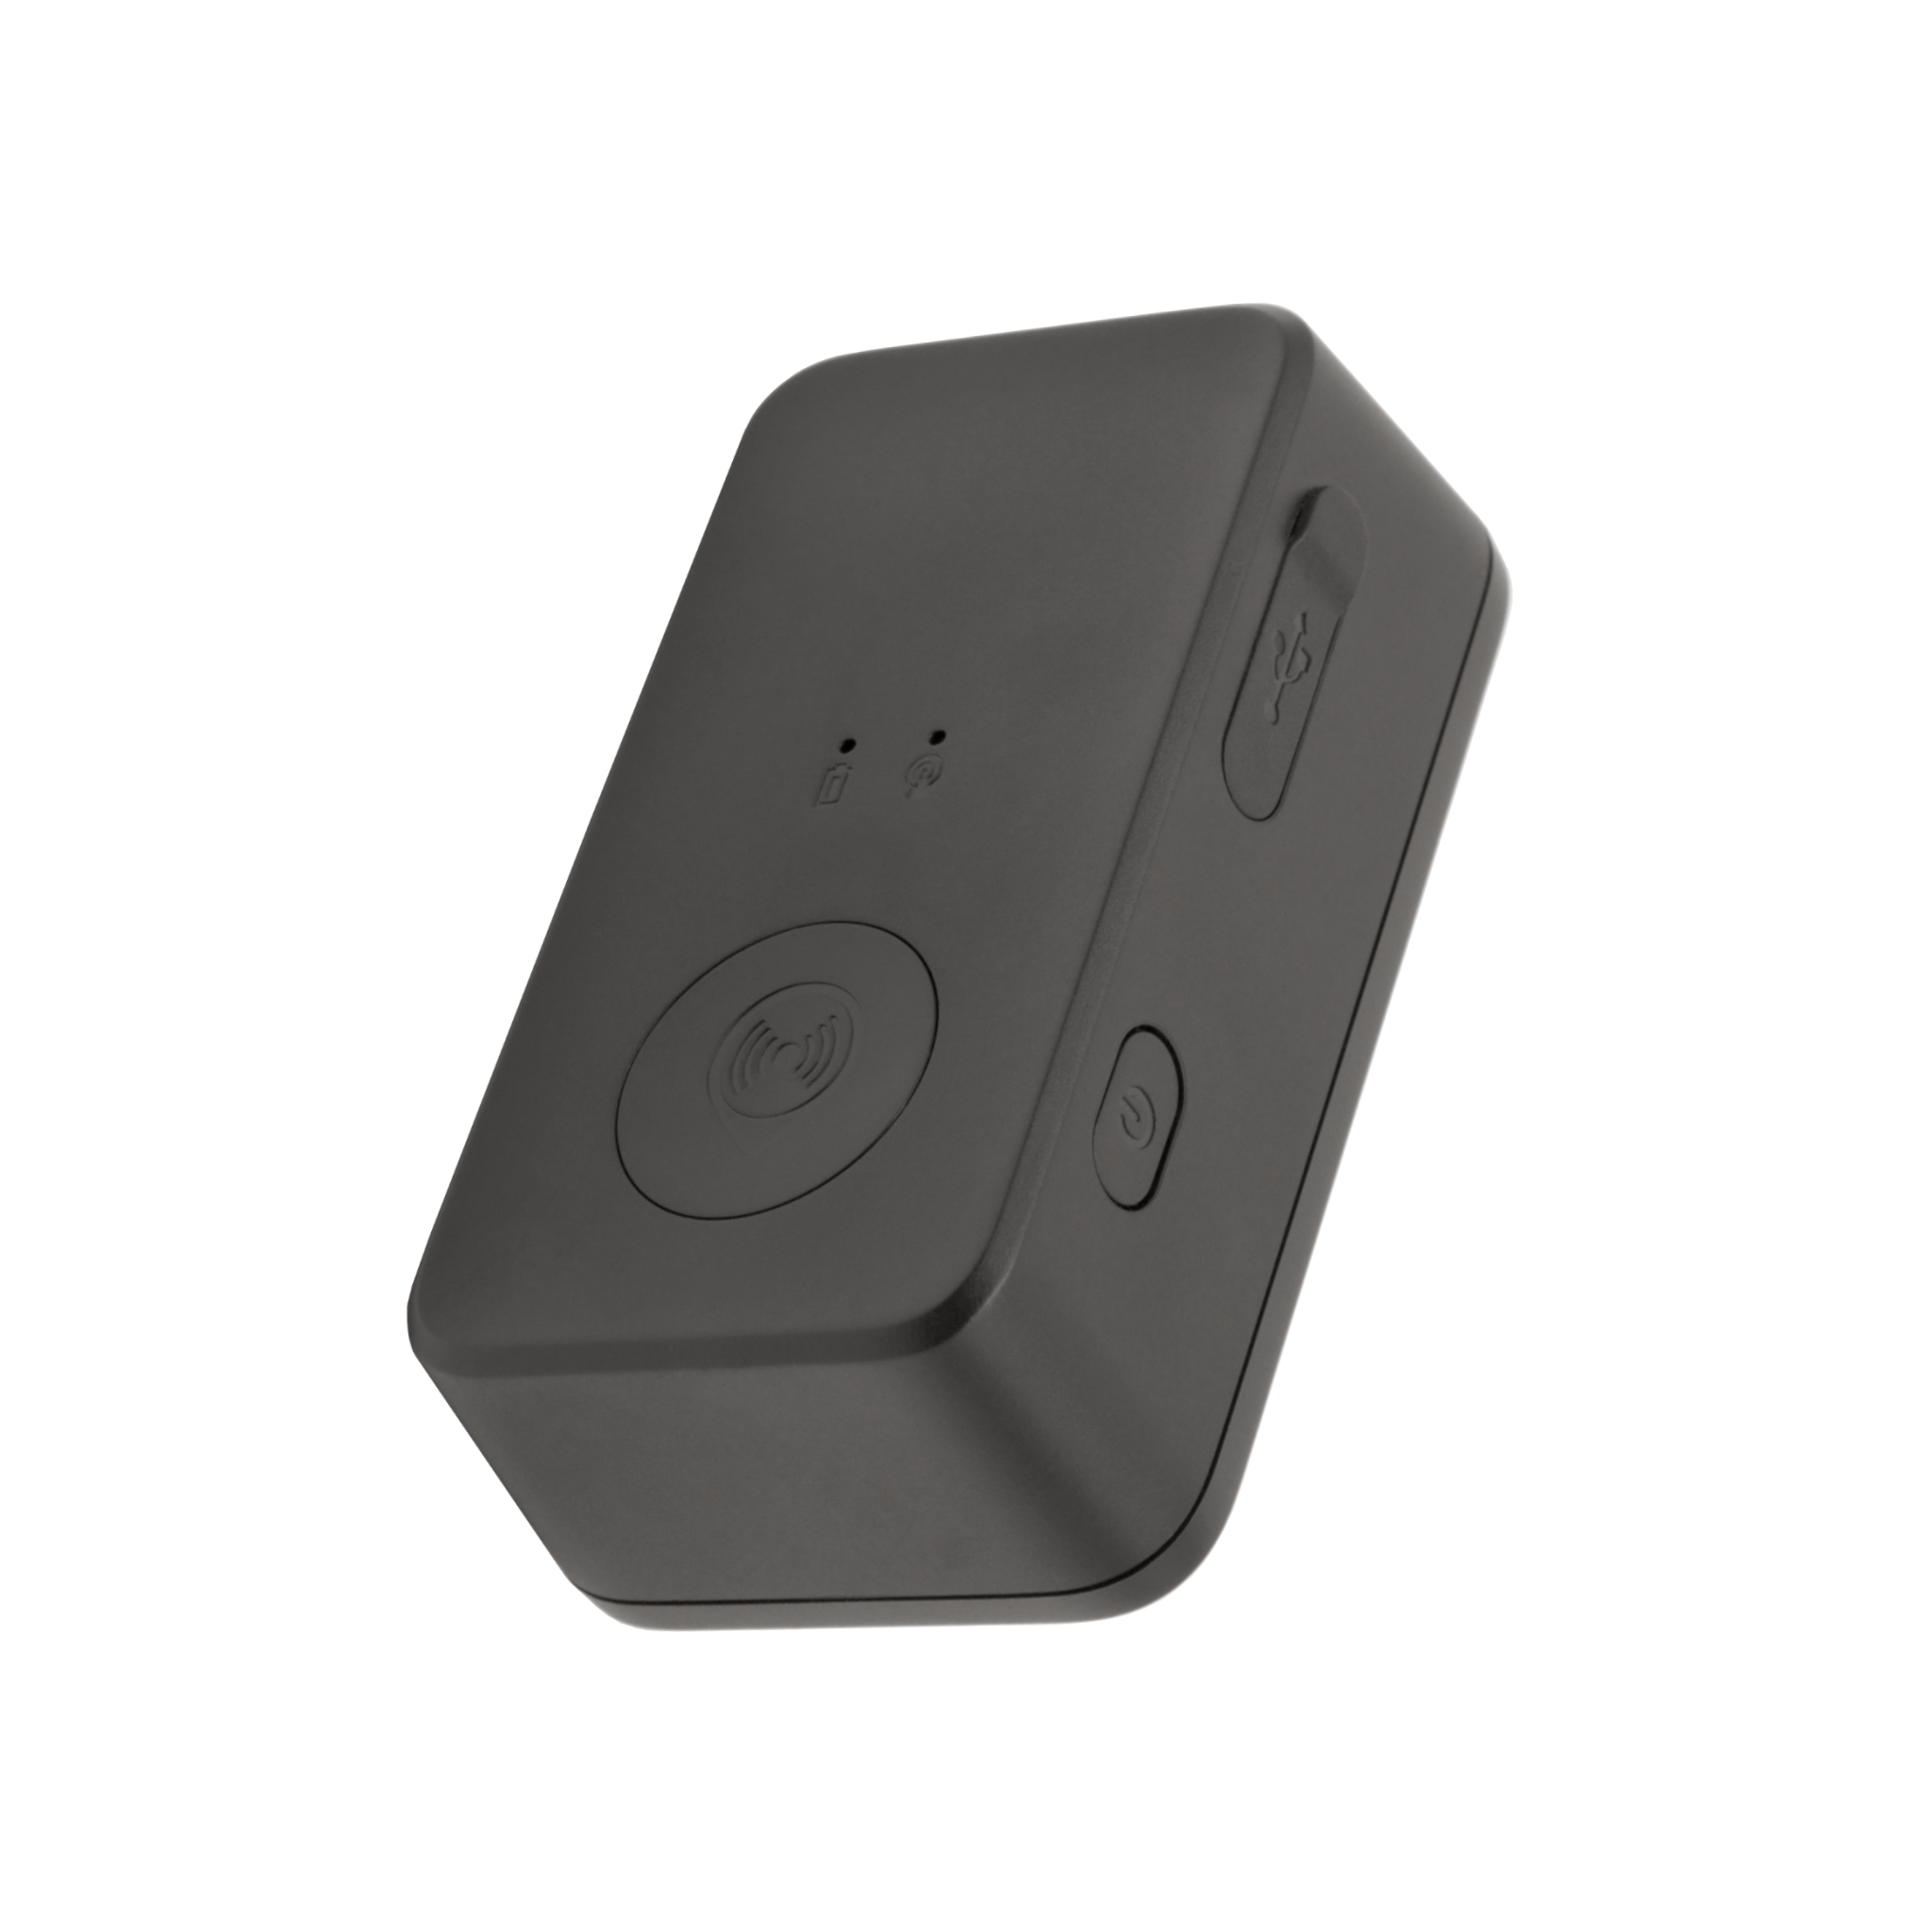 Outlander 4G Real-Time GPS Tracker w/ 1 Month of Free Service